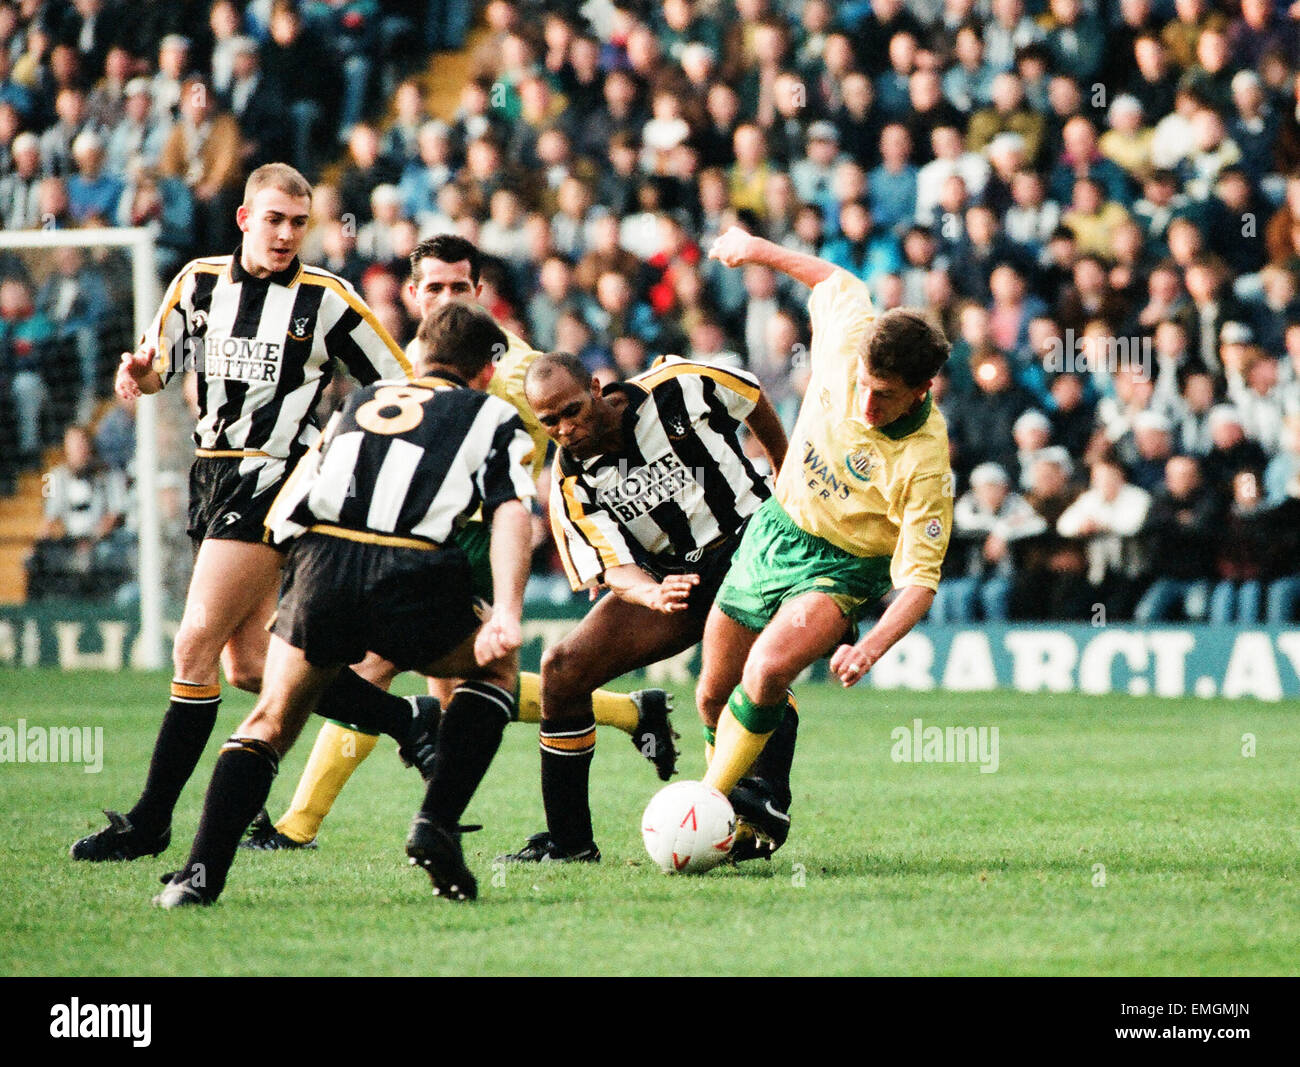 Championship League match at Meadow Lane. Notts County 0 v Newcastle United 2. Action form the match. 5th December 1992. Stock Photo